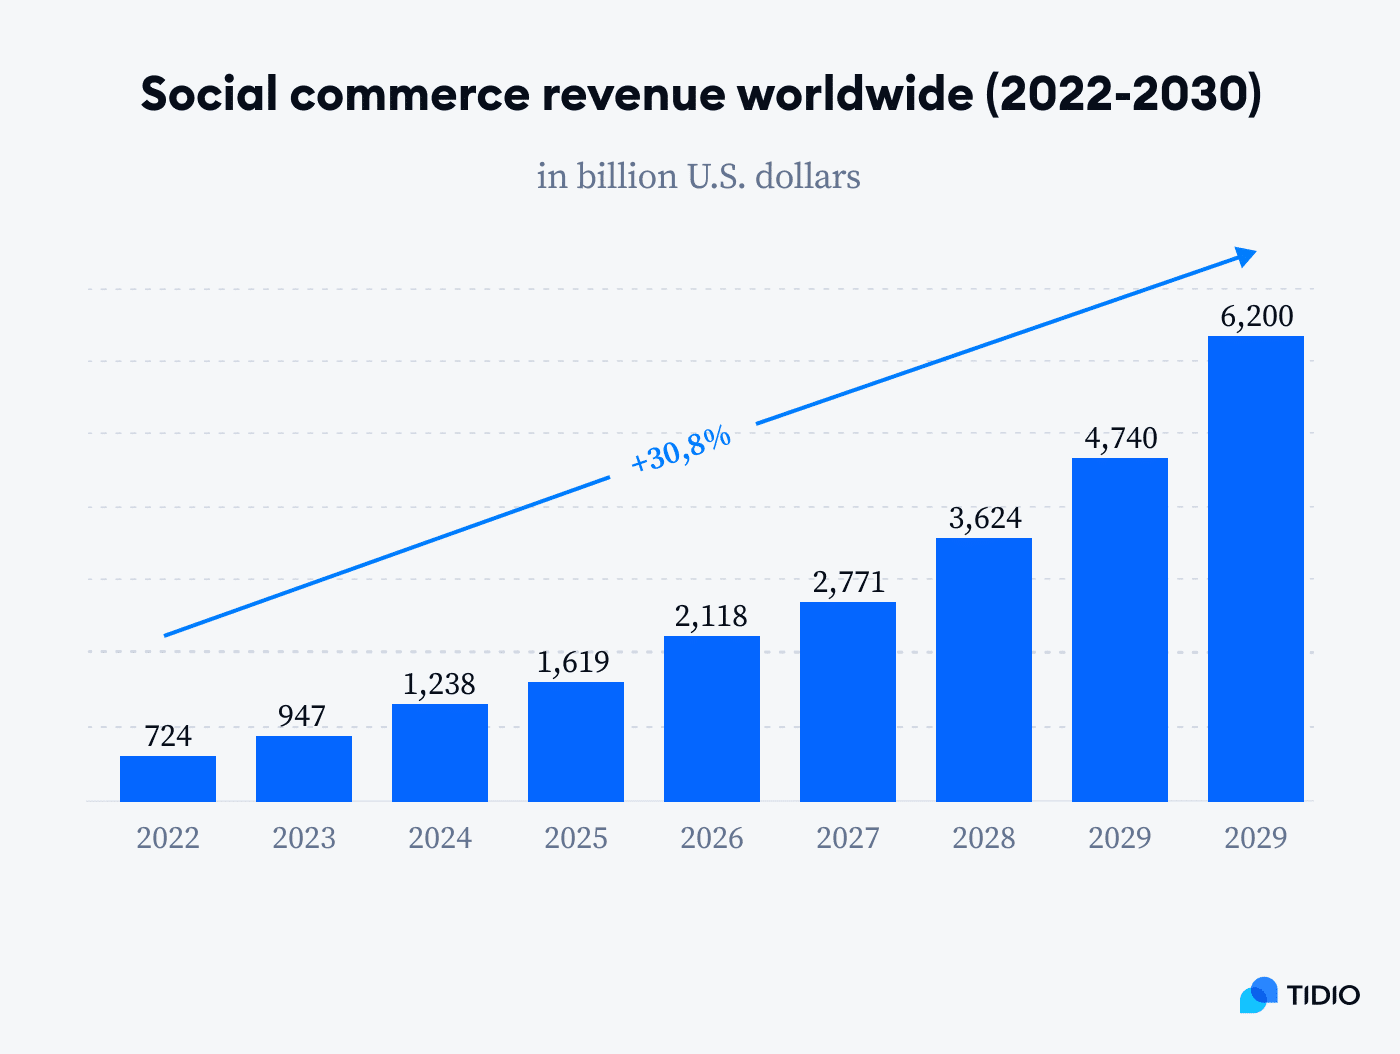 By 2030, social commerce revenue is expected to reach $6.2 trillion